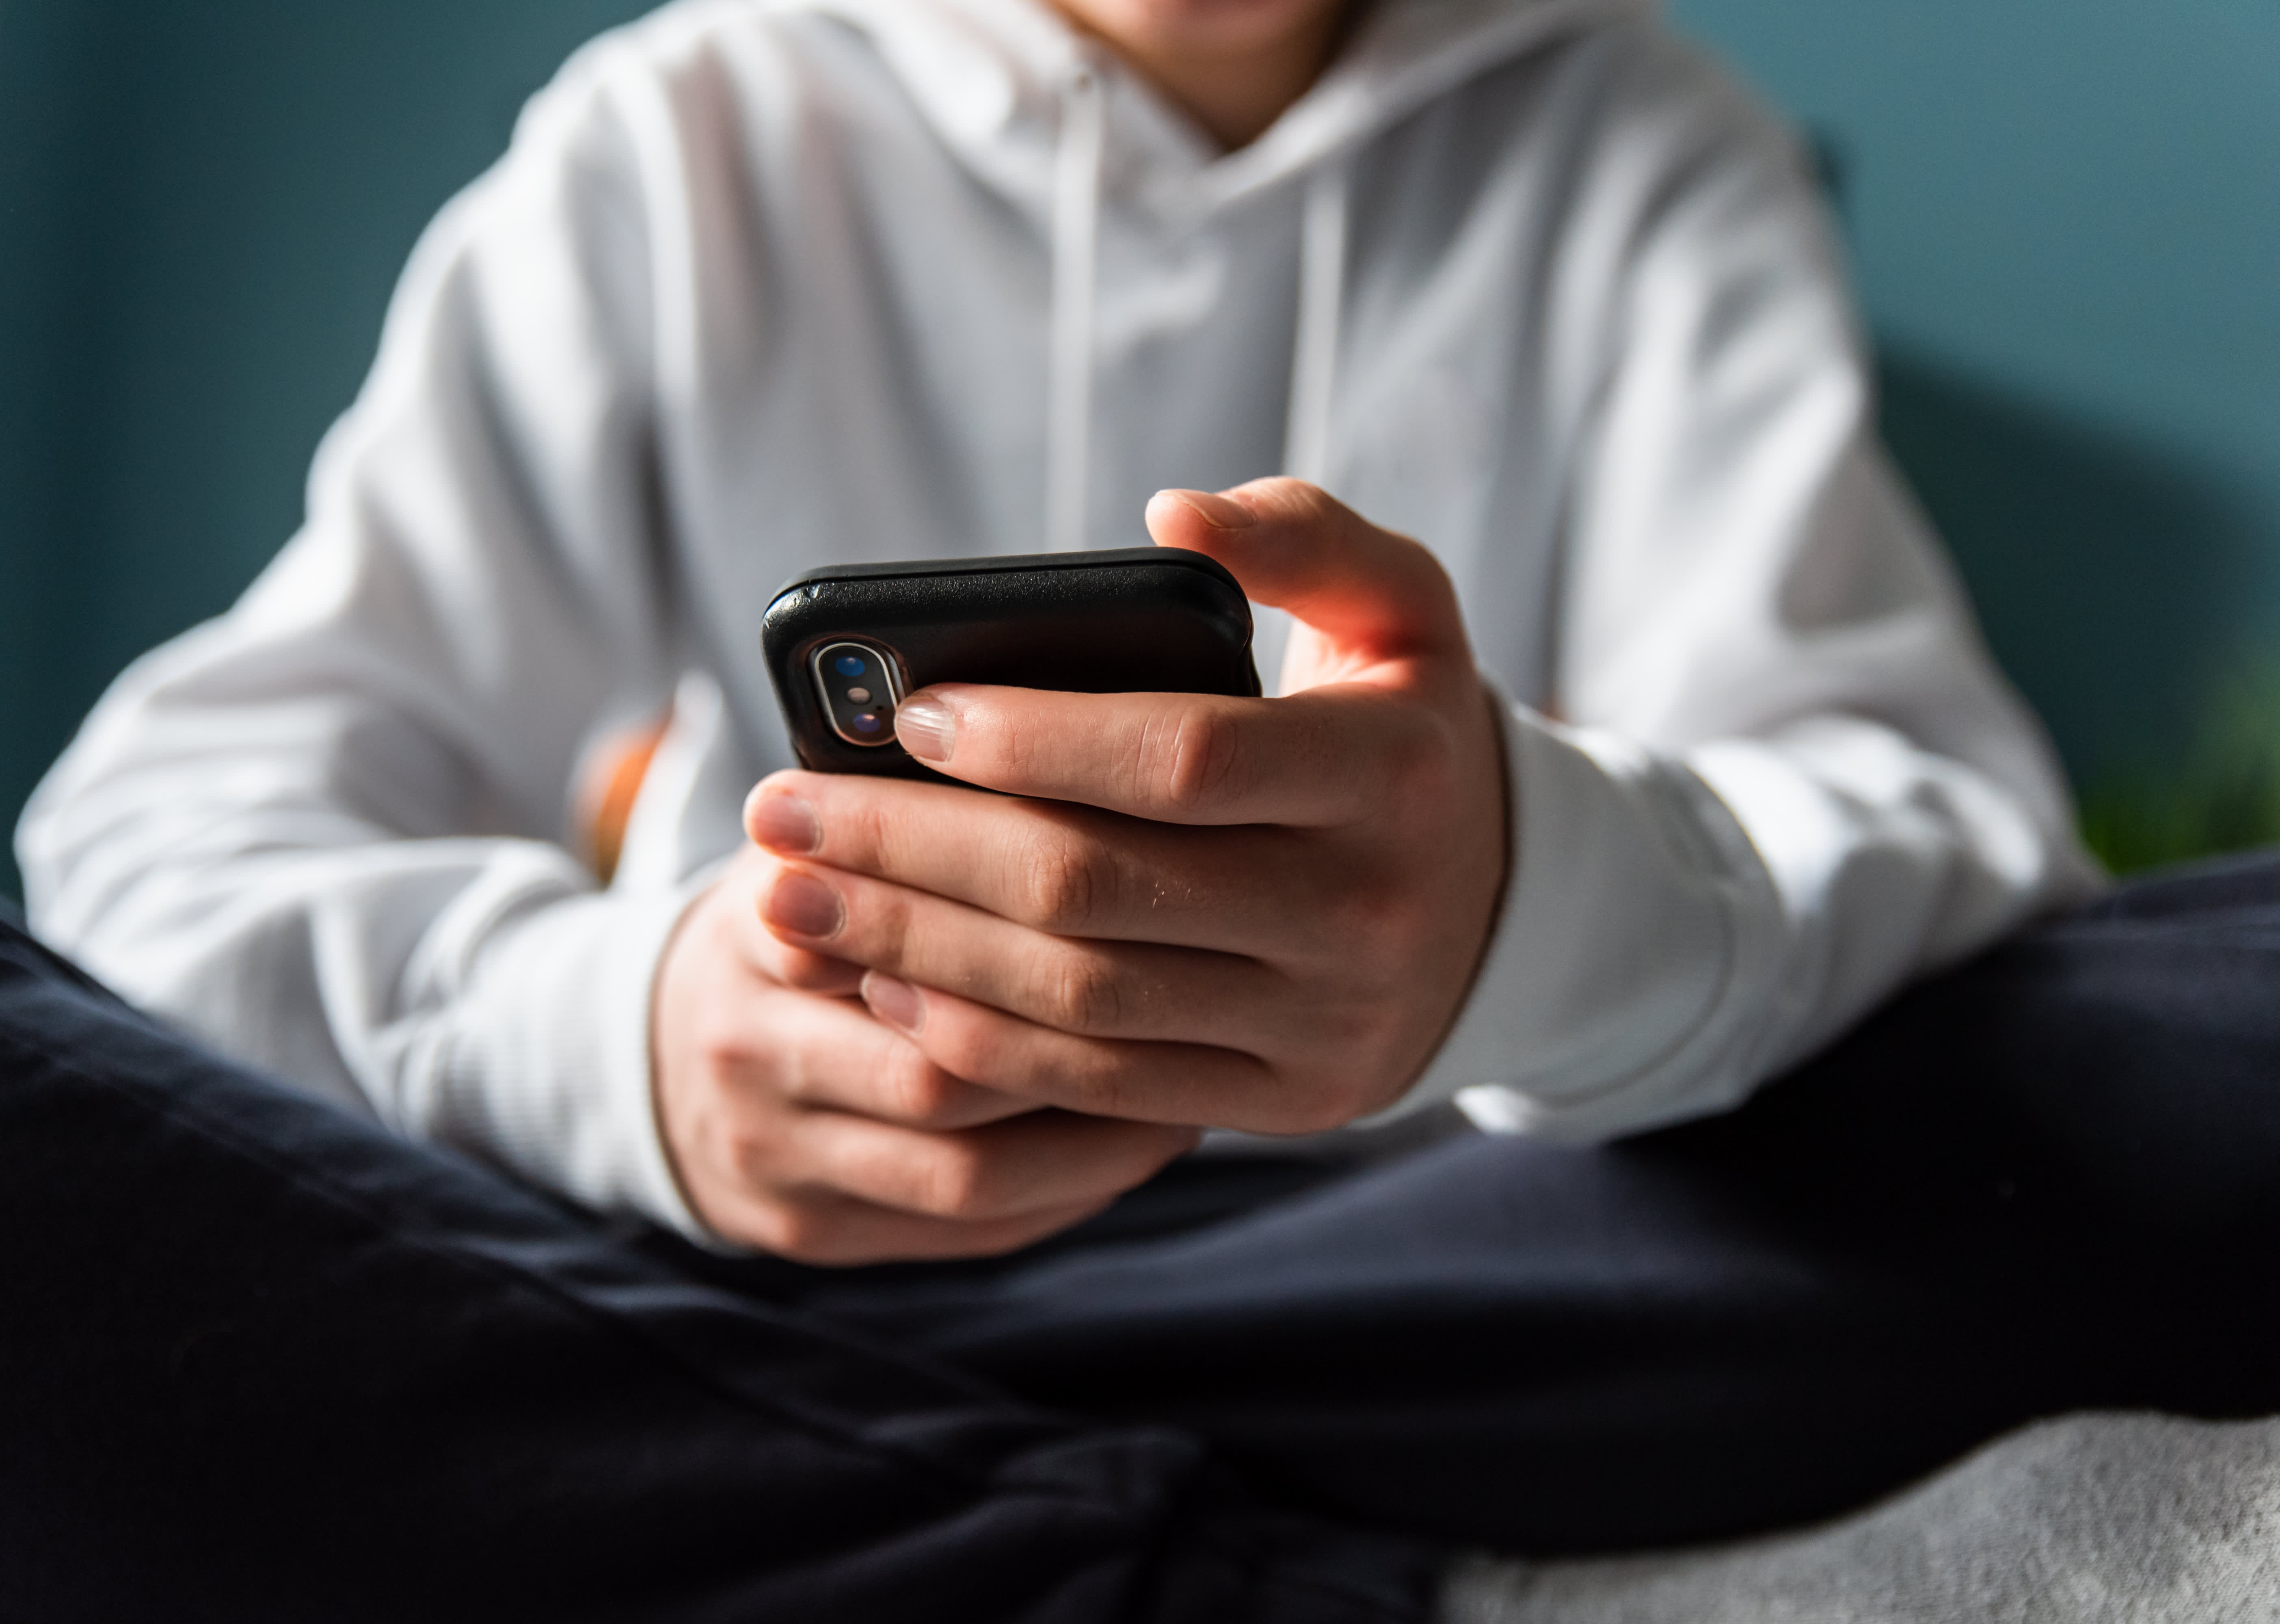 FBI: ‘Financial sextortion’ of teens is a ‘rapidly escalating threat.’ How parents can protect their kids